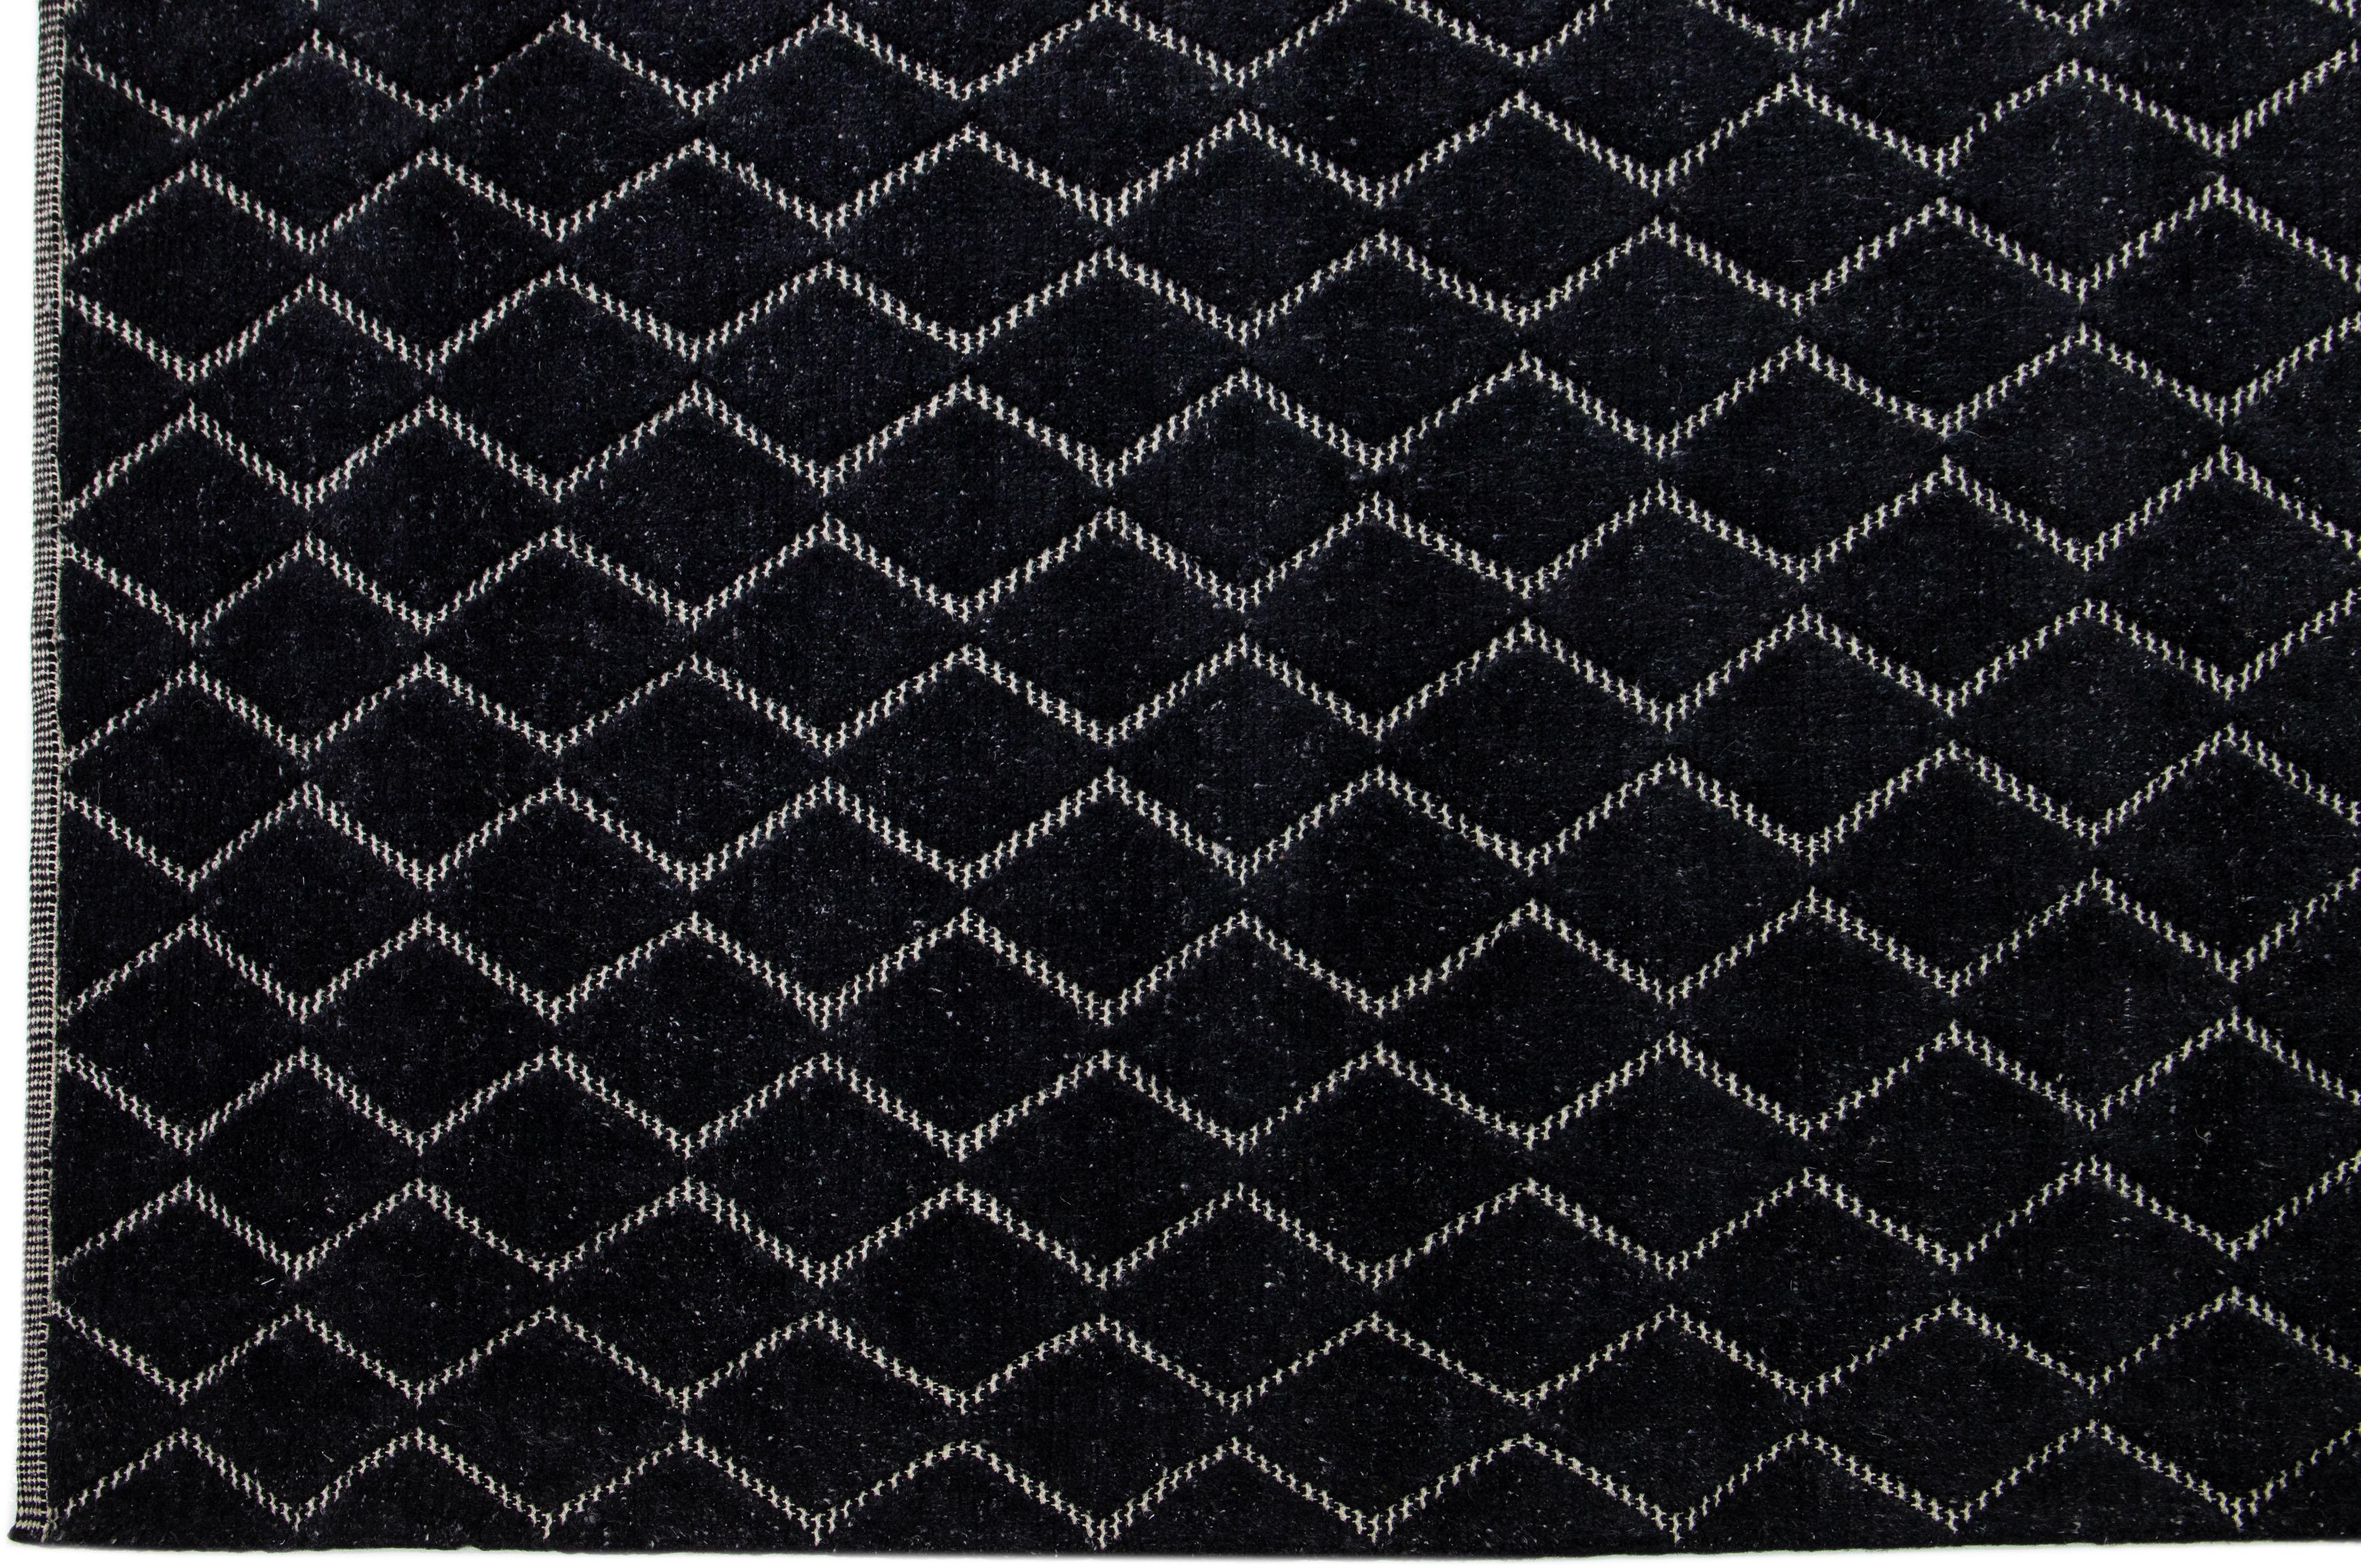 Introducing a contemporary Moroccan rug with a lavish allover geometric design intricately hand-knotted against a backdrop of elegant black.

This rug measures 10'3